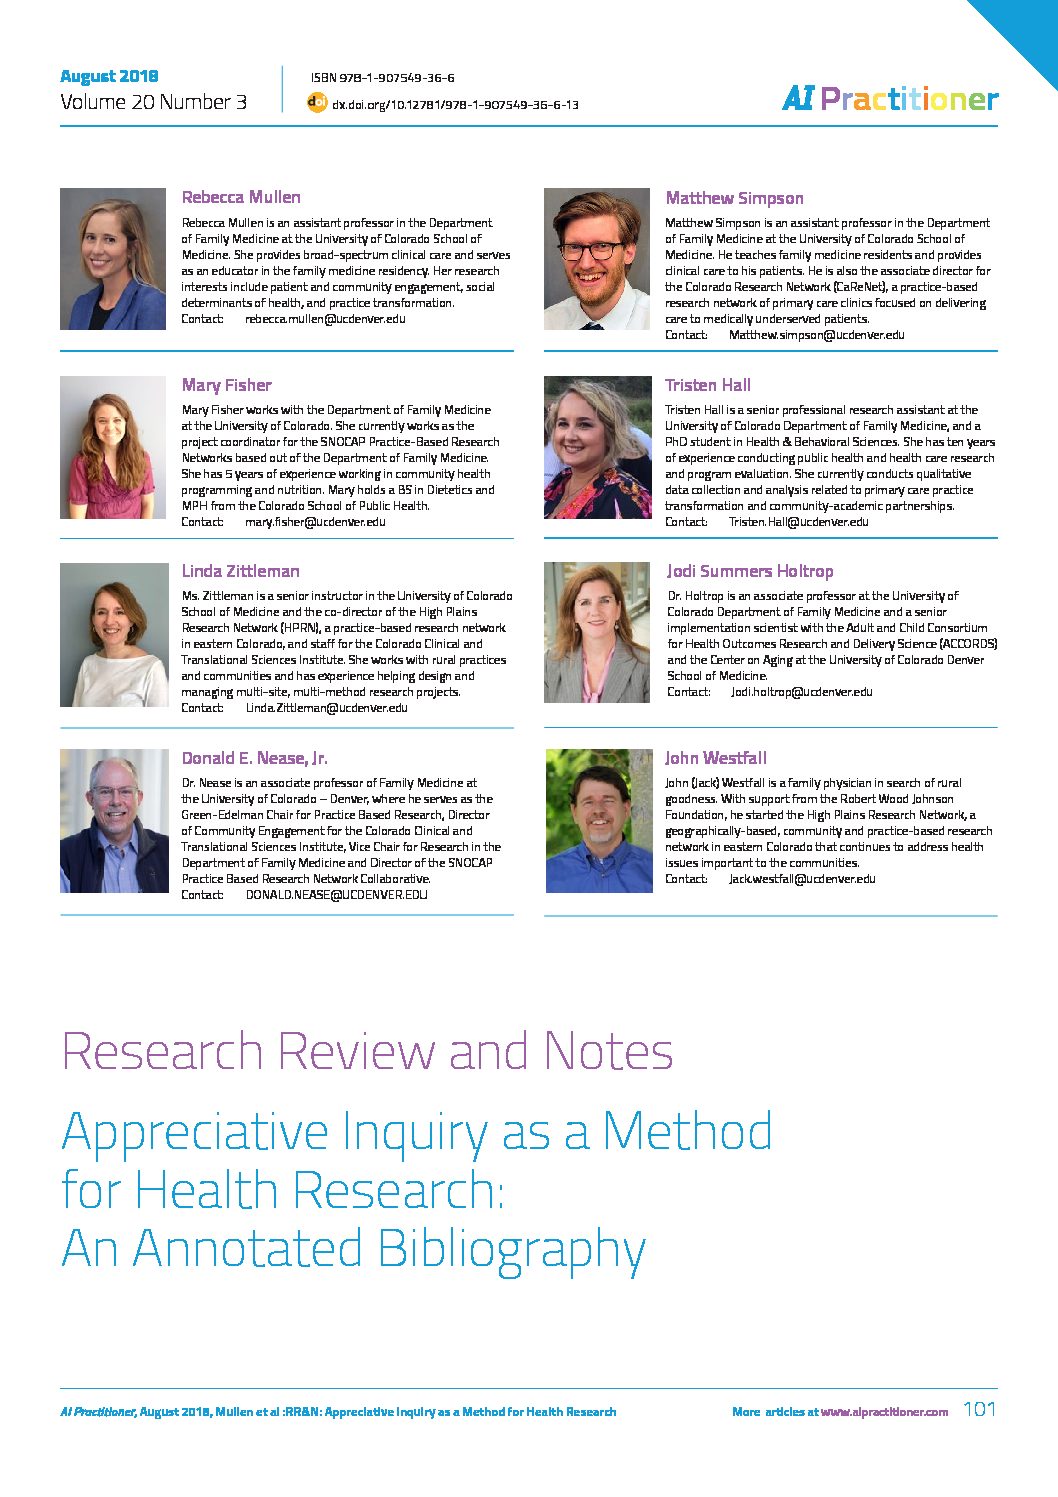 aip-august18-appreciative-voice-annotated-bibliography-ai-and-health-research